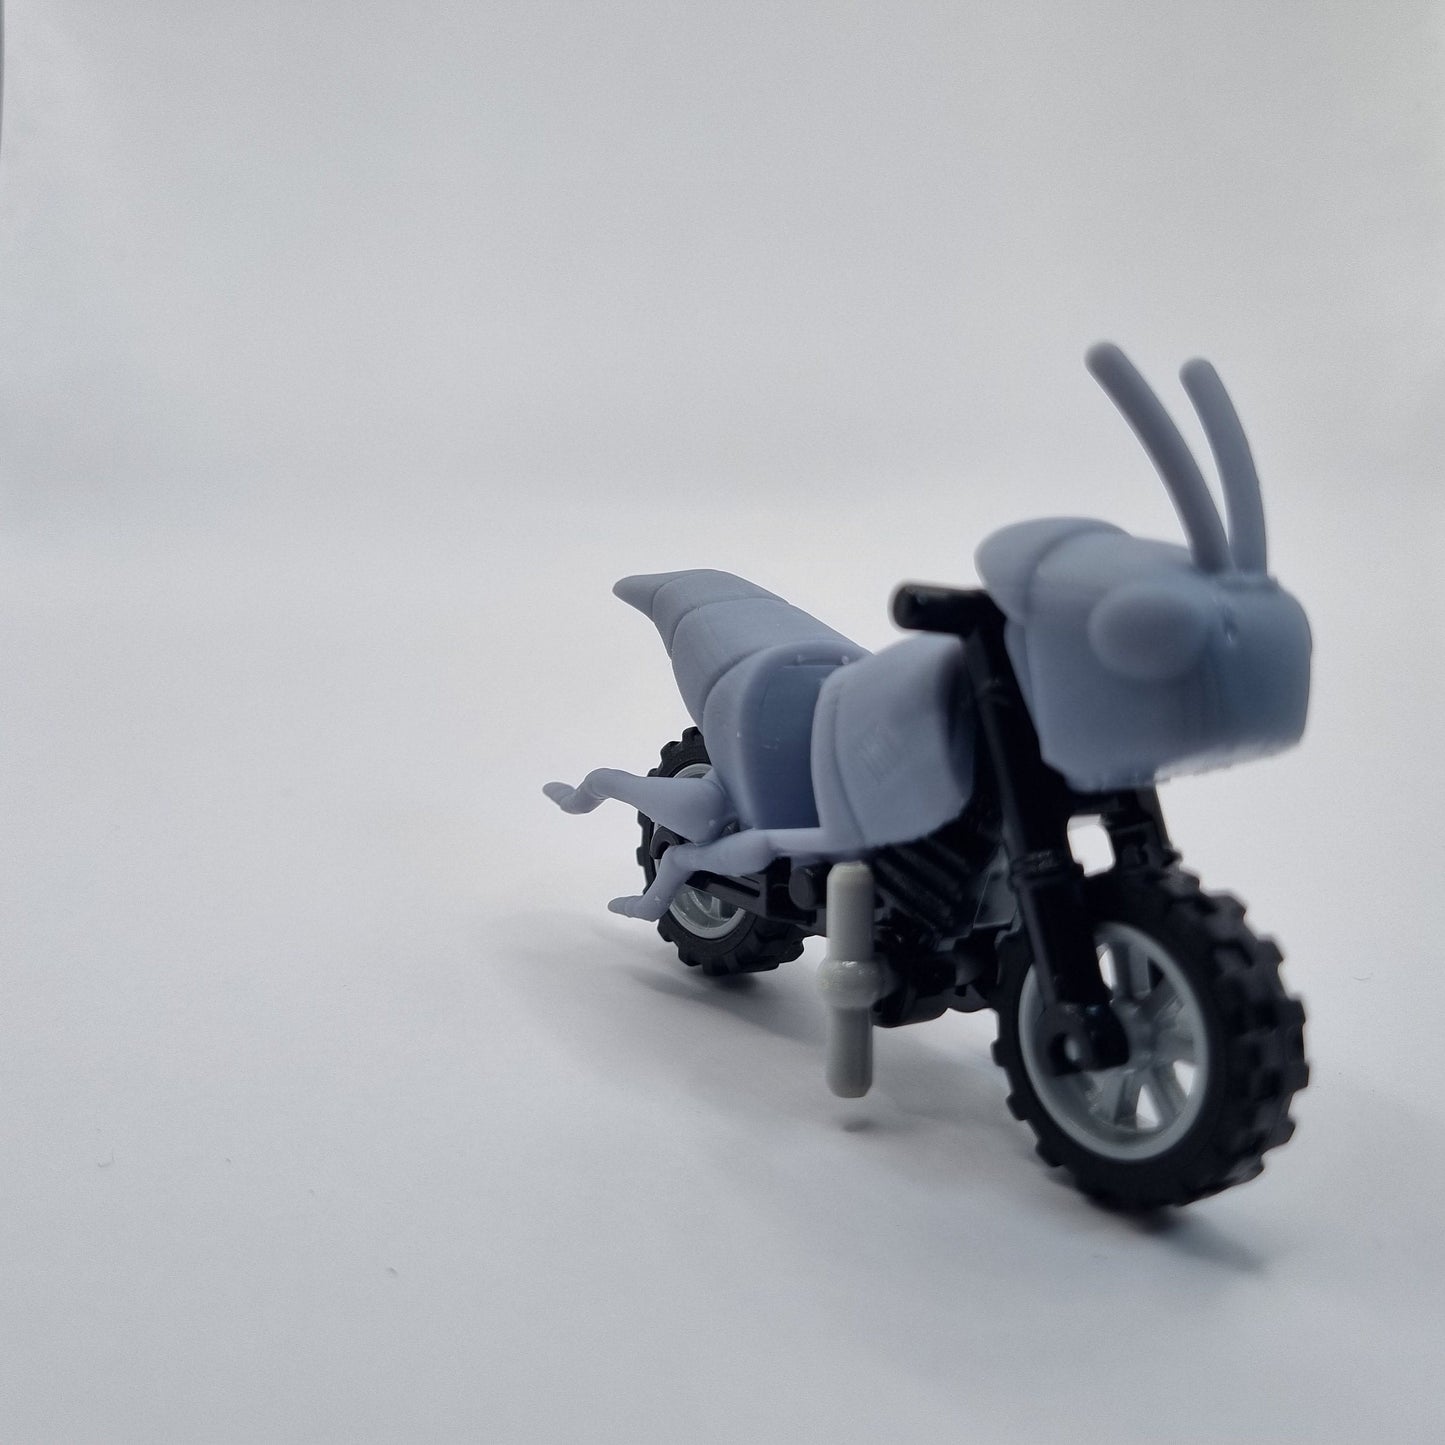 Building toy bug mothercycle!